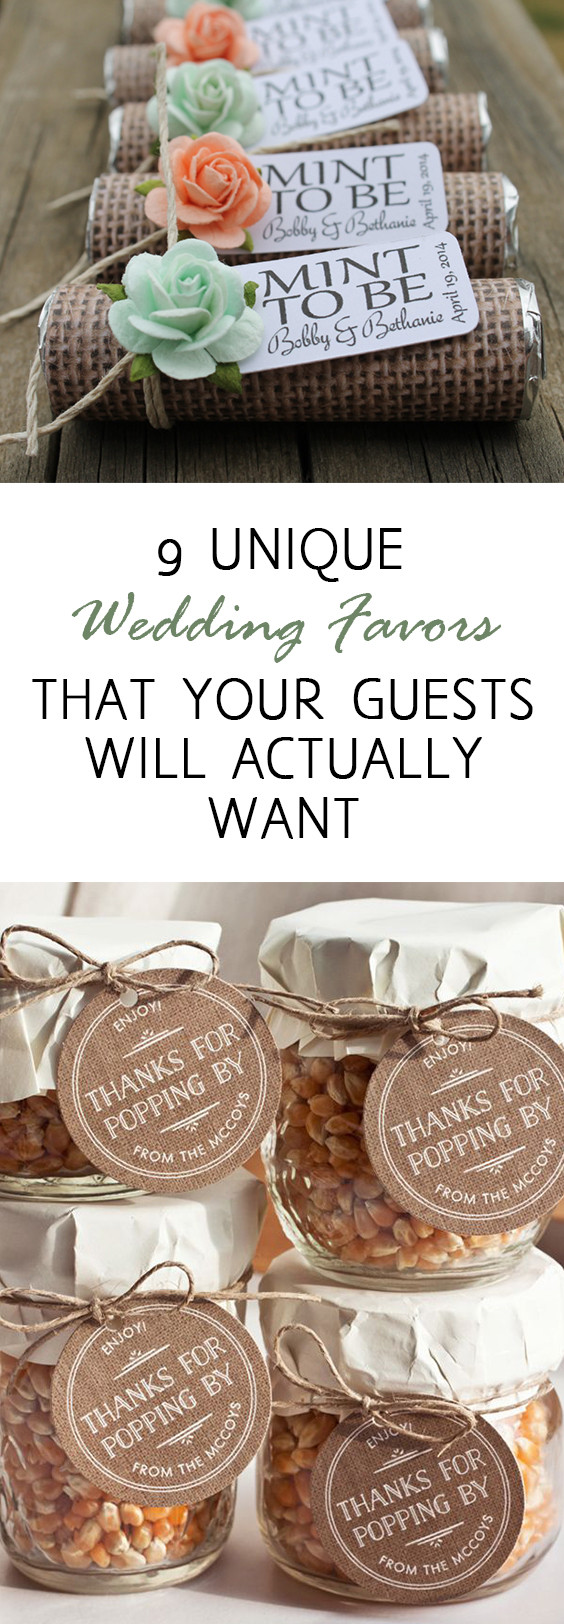 Inexpensive Wedding Favors Ideas
 9 Unique Wedding Favors that Your Guests Will Actually